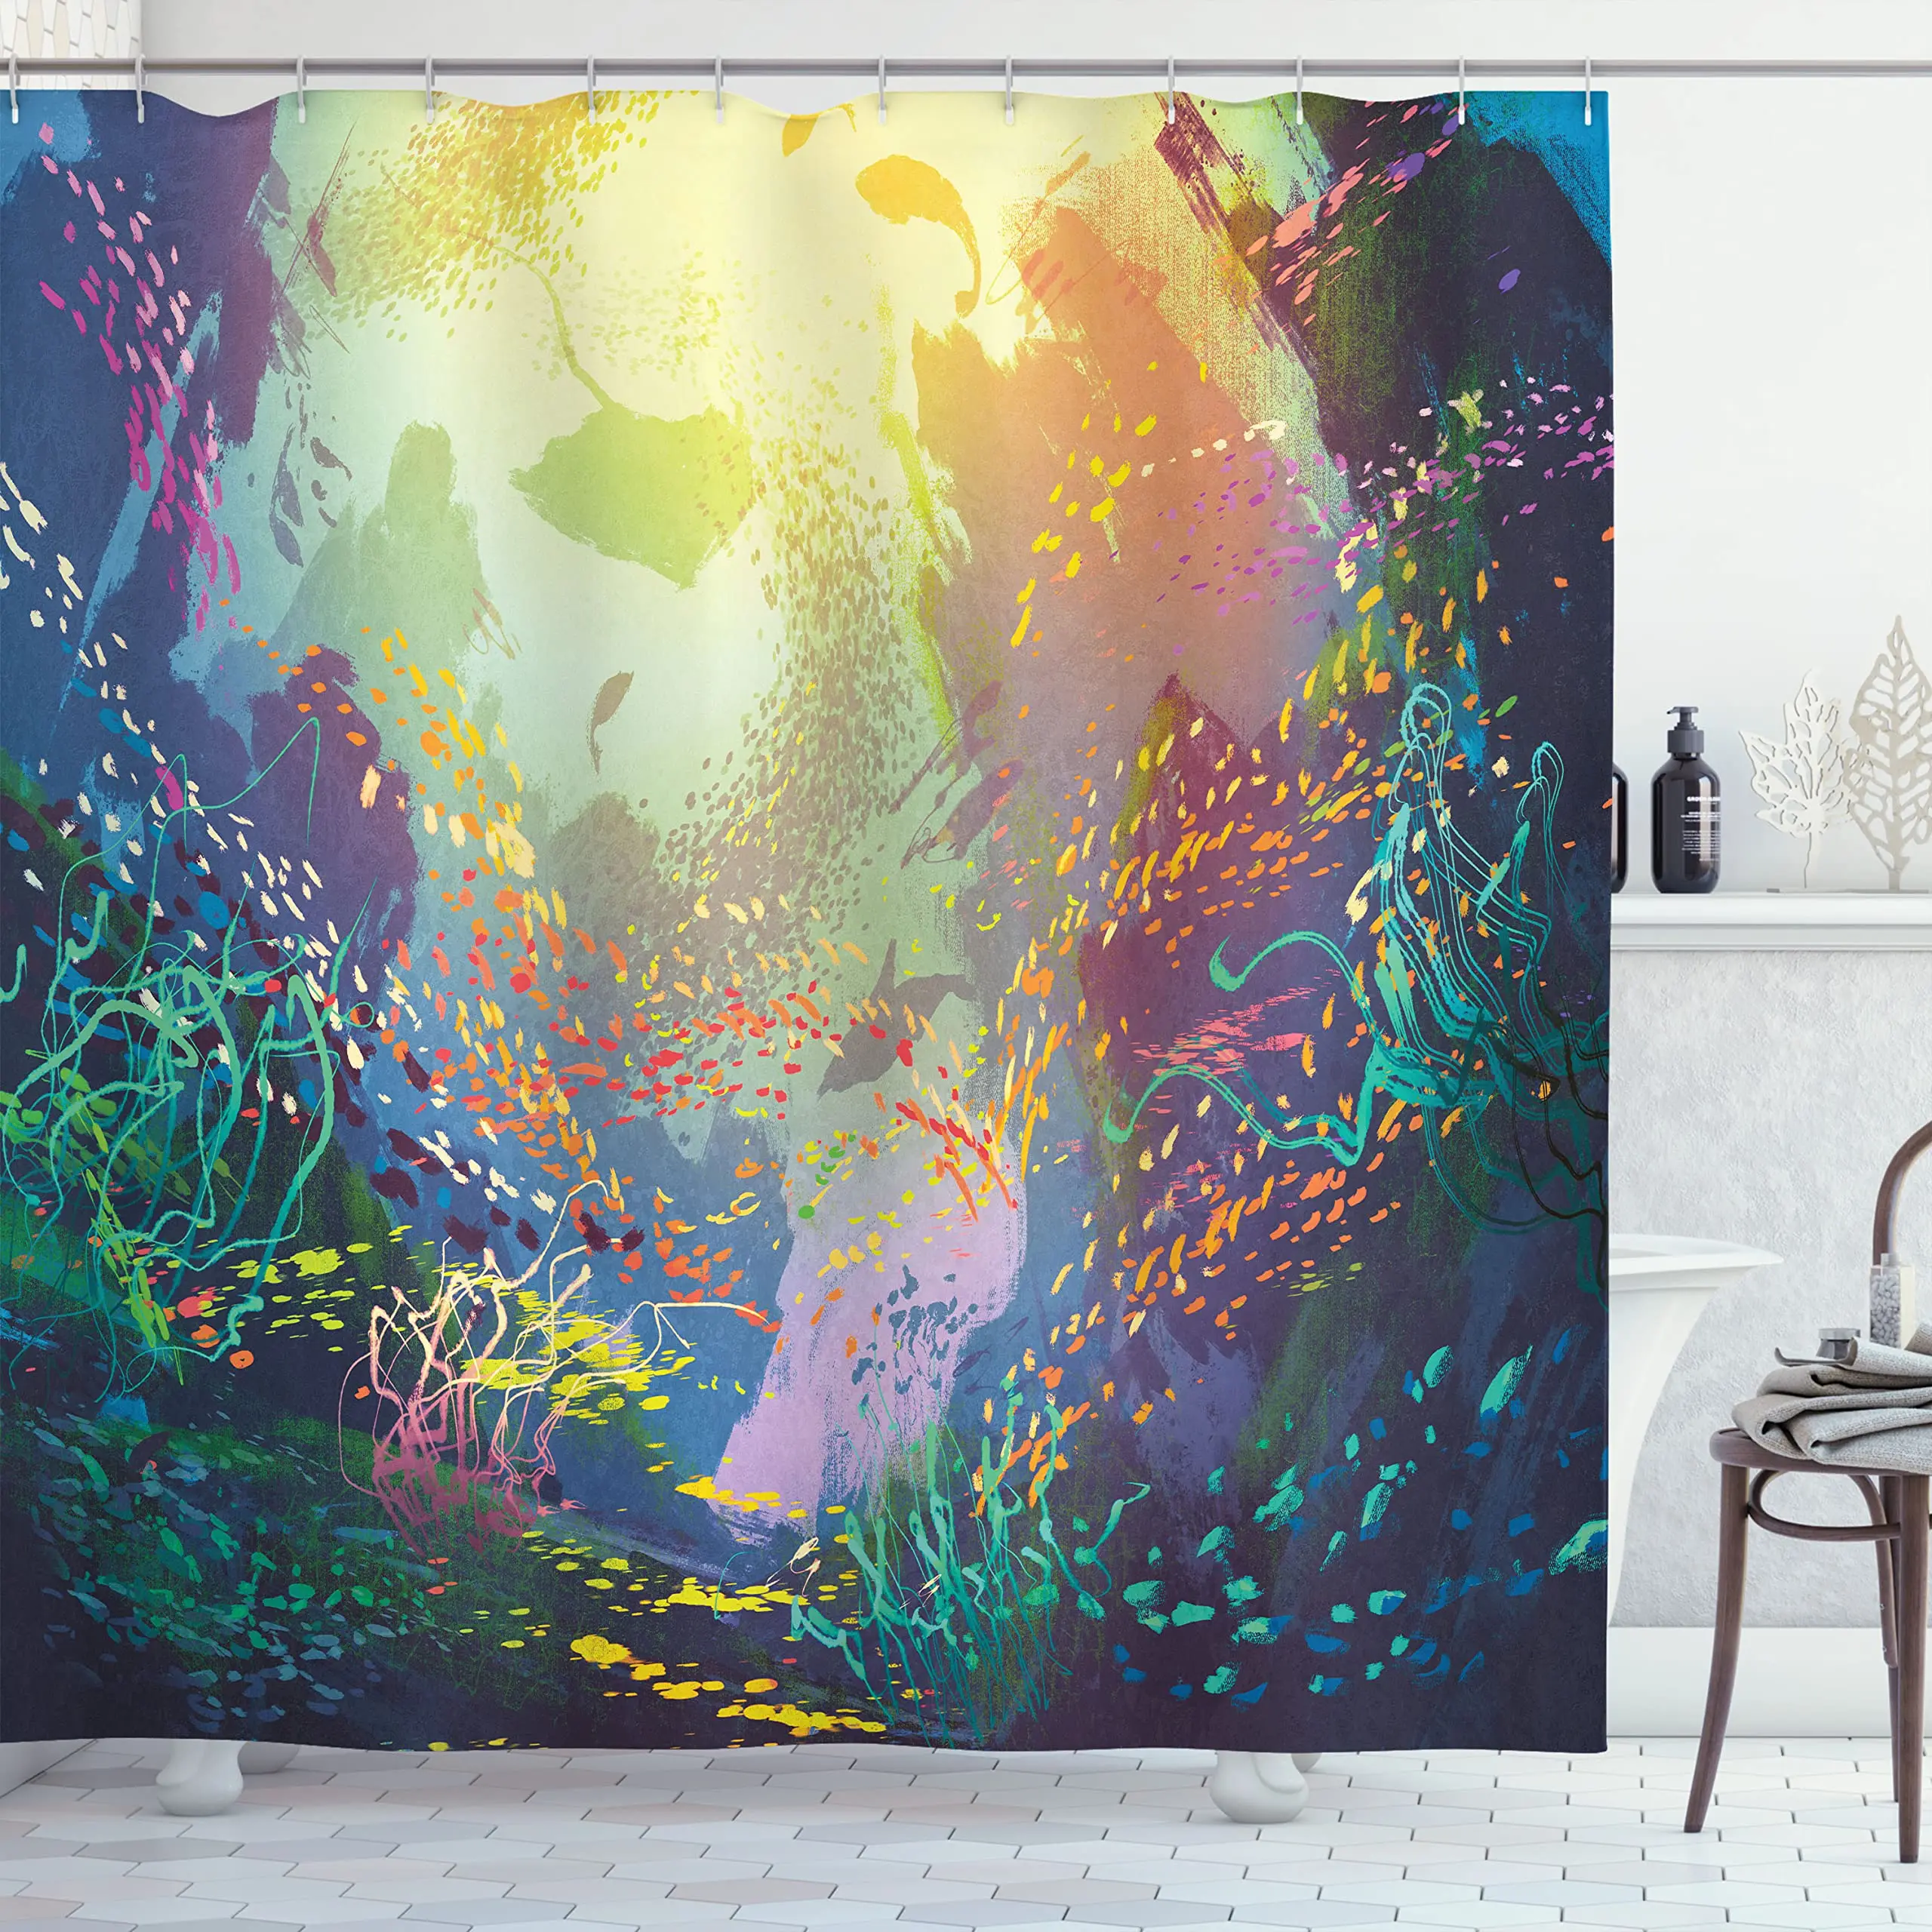 Sea Animals Shower Curtain, Underwater with Coral Reef and Colorful Fish Aquarium Cloth Fabric Bathroom Curtains Decor Set,Hooks